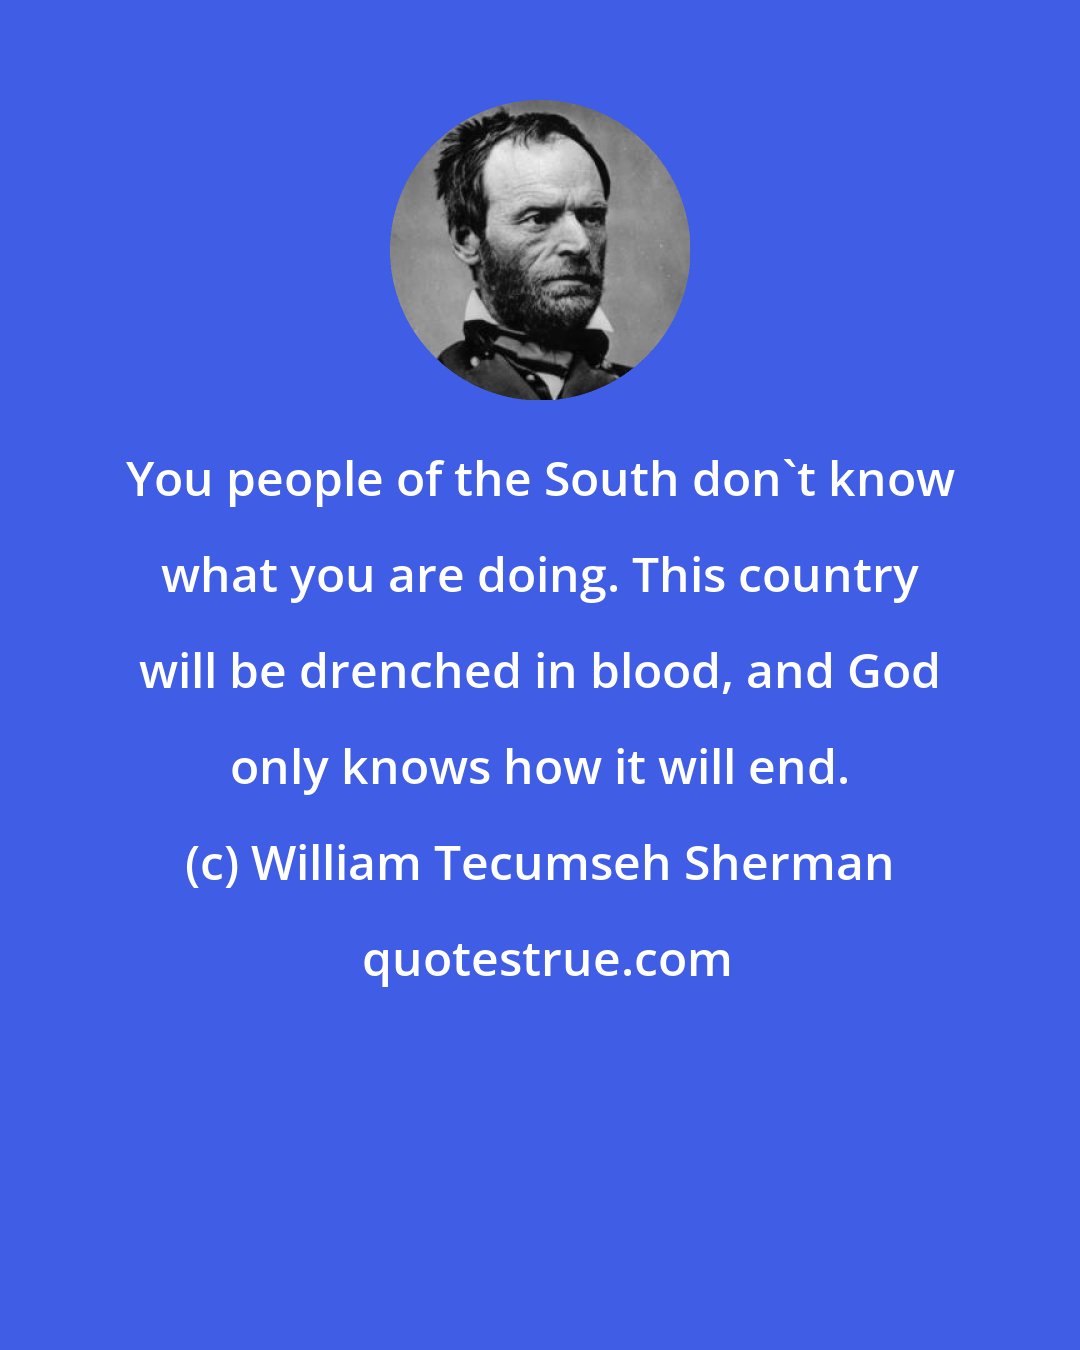 William Tecumseh Sherman: You people of the South don't know what you are doing. This country will be drenched in blood, and God only knows how it will end.